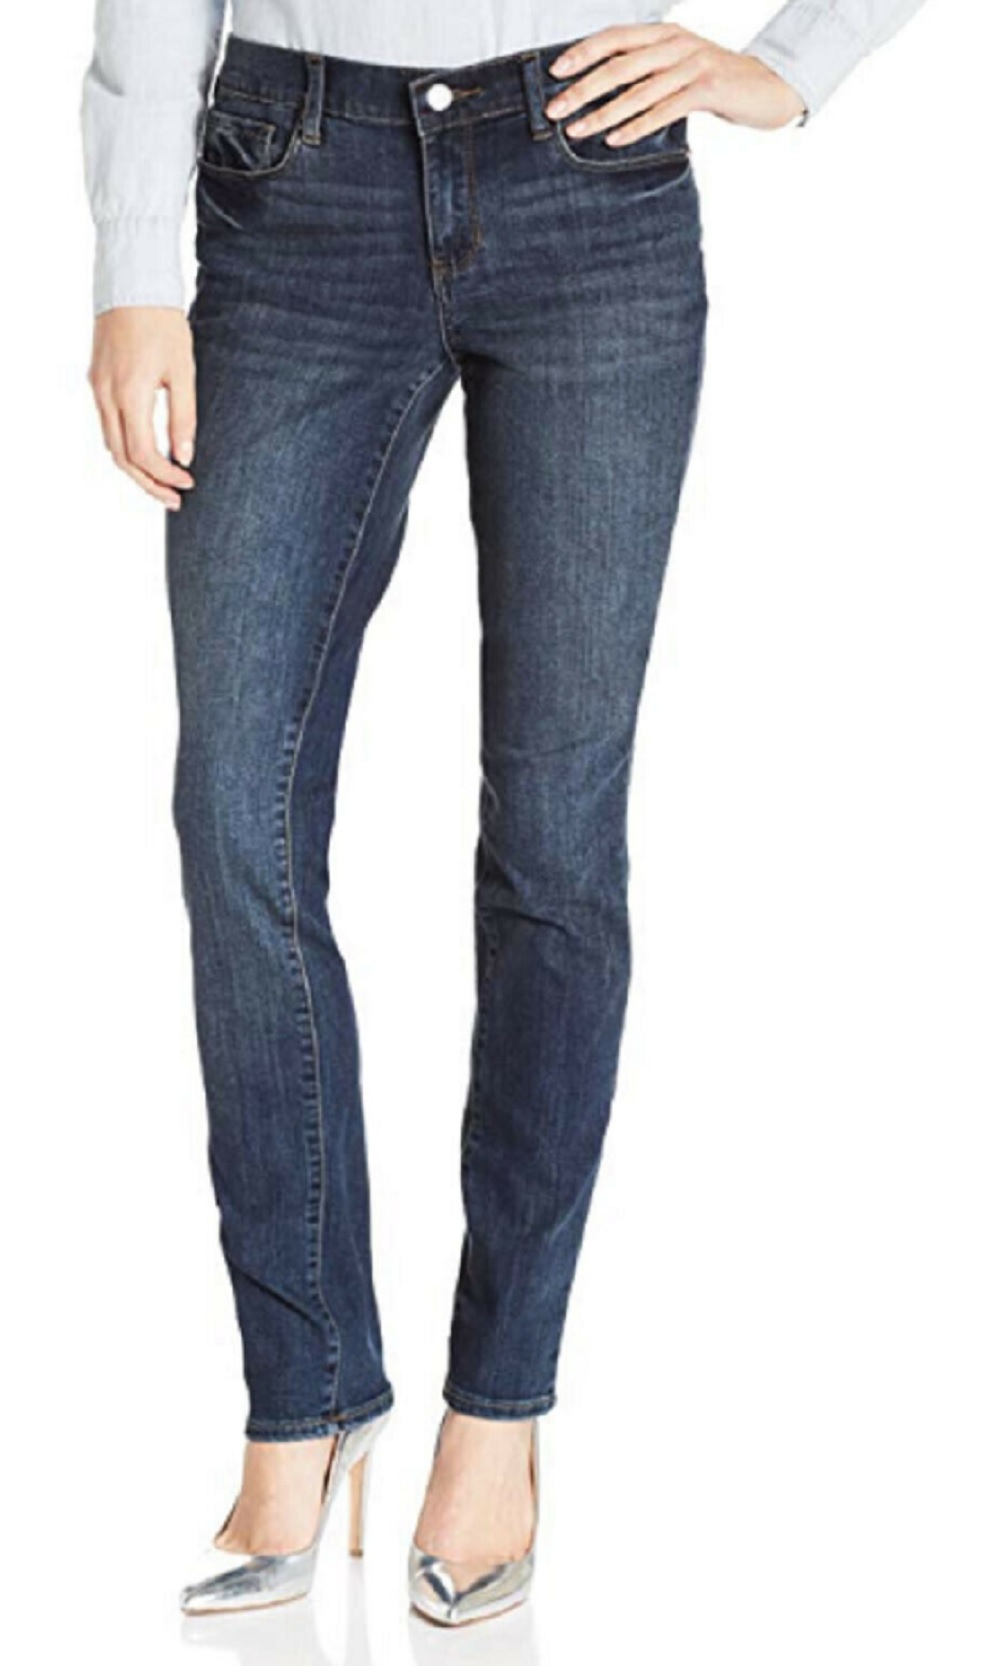 DKNY Jeans Ladies' Soho Classic Skinny Jeans Chelsea Wash (2x30) - image 1 of 2